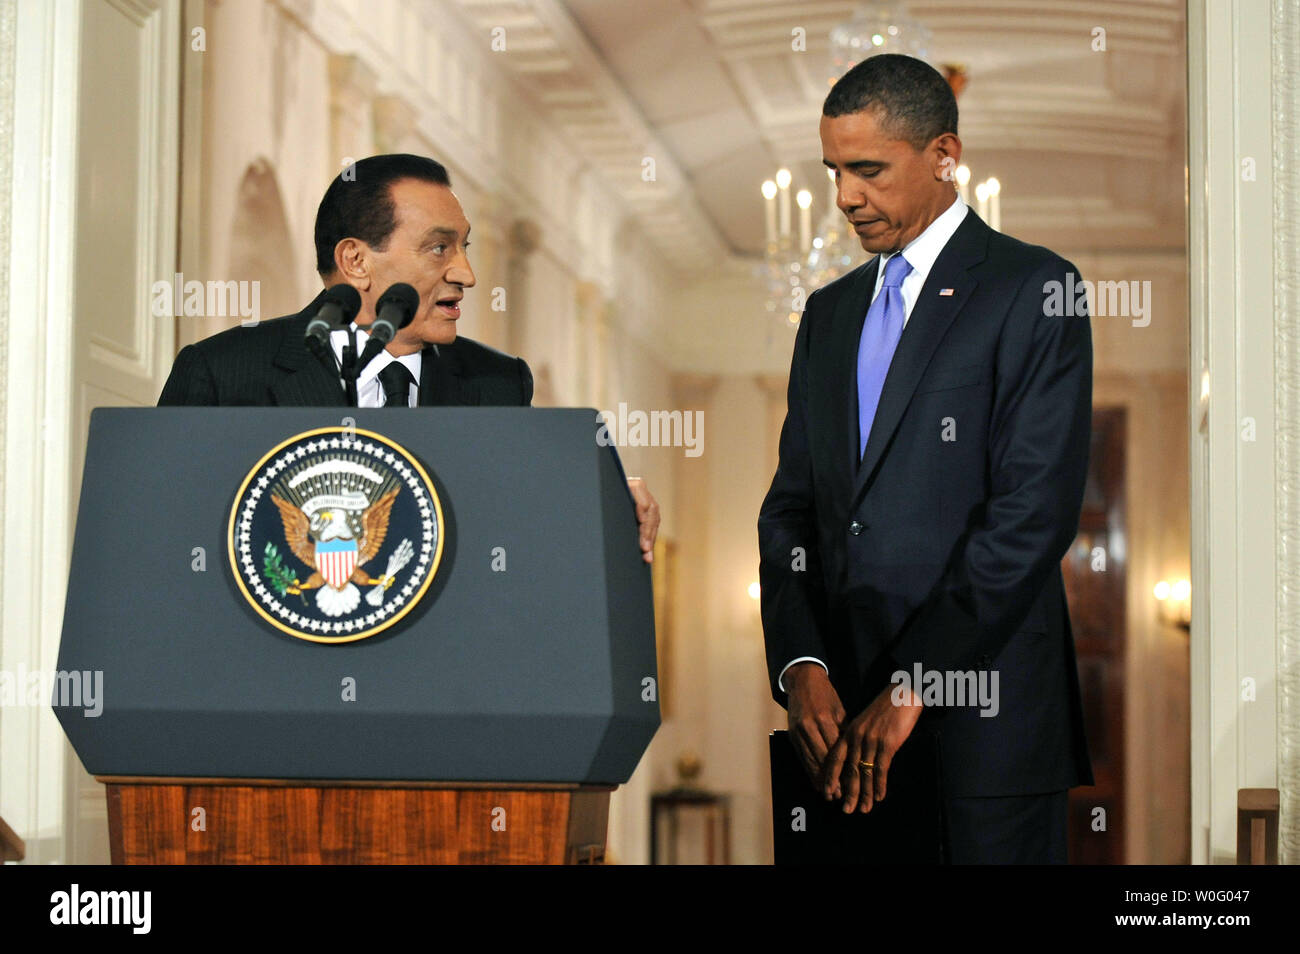 President Hosni Mubarak of Egypt (L) delivers remarks alongside U.S. President Barack Obama following their meeting at the White House in Washington on September 1, 2010. Tomorrow begins the first direct peace talks between Israel and the Palestinian Authority in two years. UPI/Kevin Dietsch Stock Photo